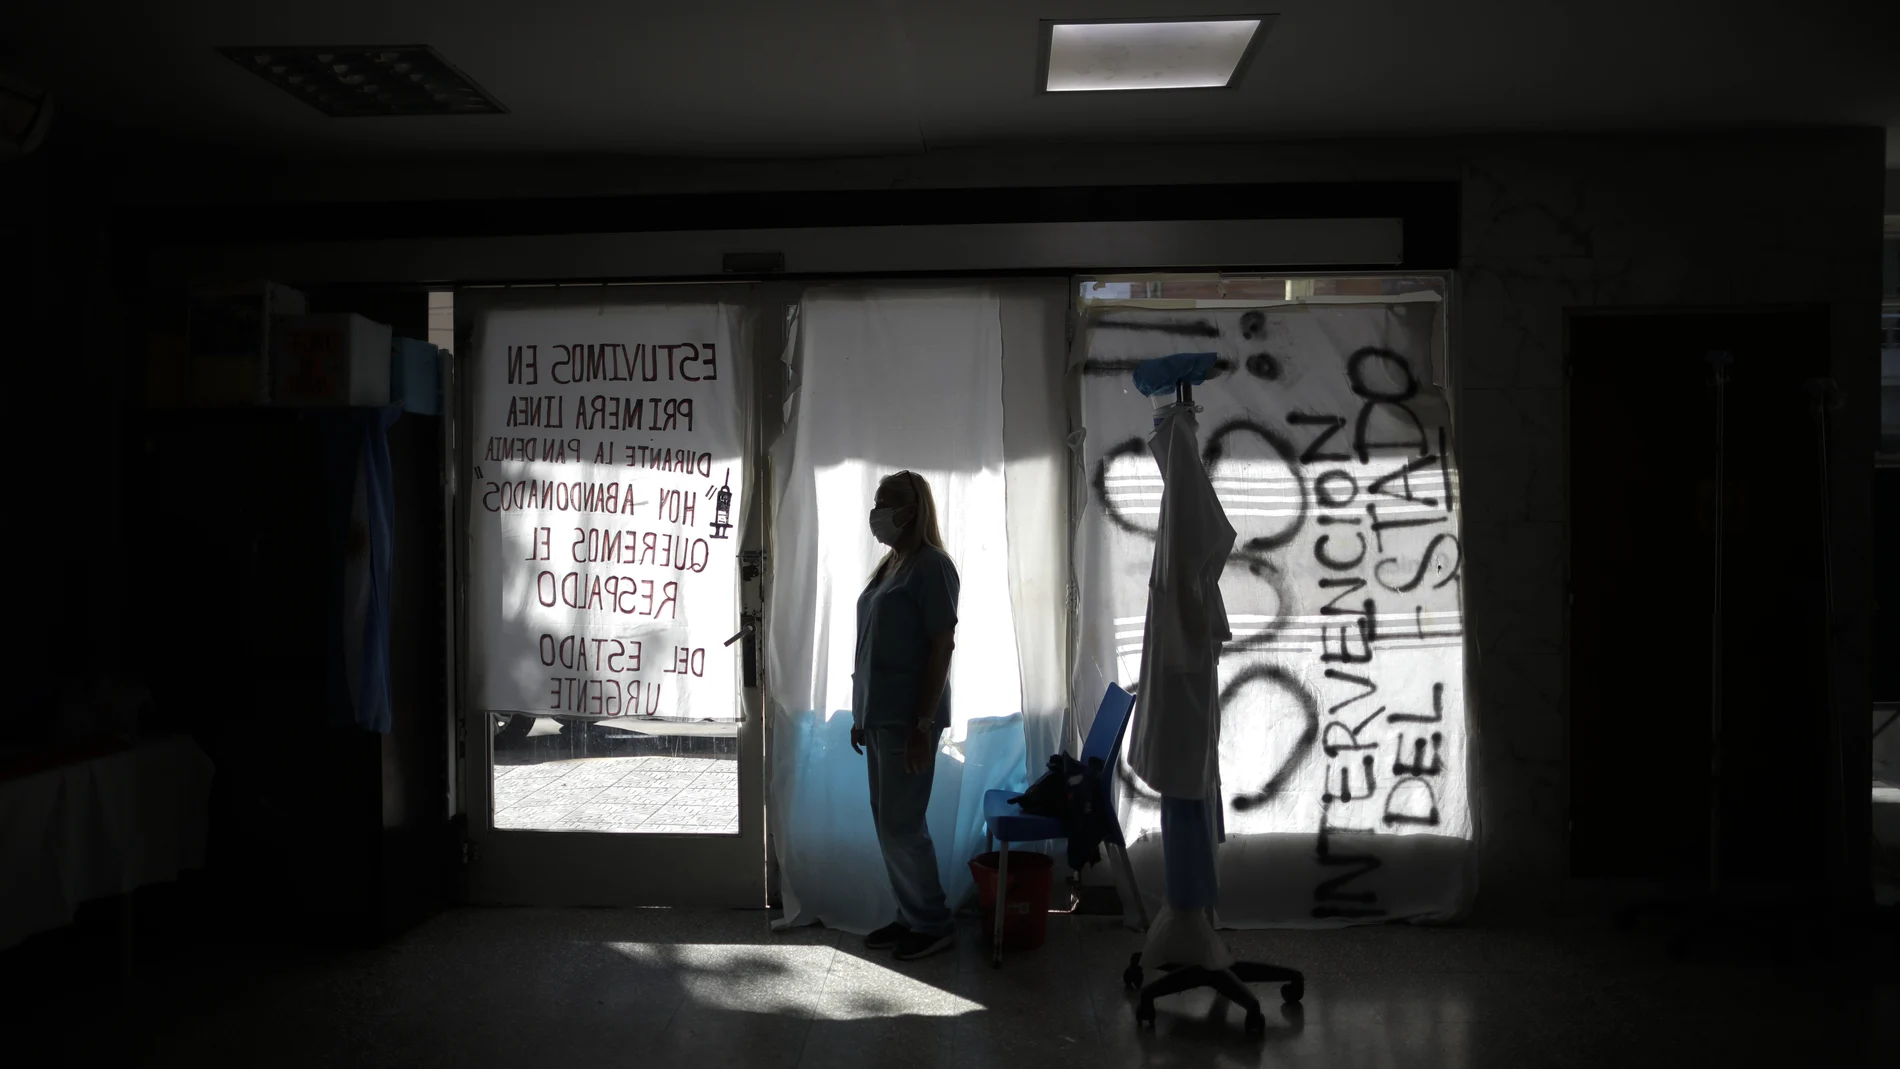 Nurse Lidia Del Valle stands inside San Andres Clinic which has been occupied by its former workers since it closed at the start of the year following the death of the hospital's director and owner in Caseros, Argentina, Friday, April 30, 2021. While the pandemic has swelled the need for hospital beds, many private clinics say they're struggling to survive, citing the pandemic having pushed away many non-COVID patients and losing money on coronavirus sufferers because the government insurance program doesn't pay enough to meet costs. (AP Photo/Natacha Pisarenko)